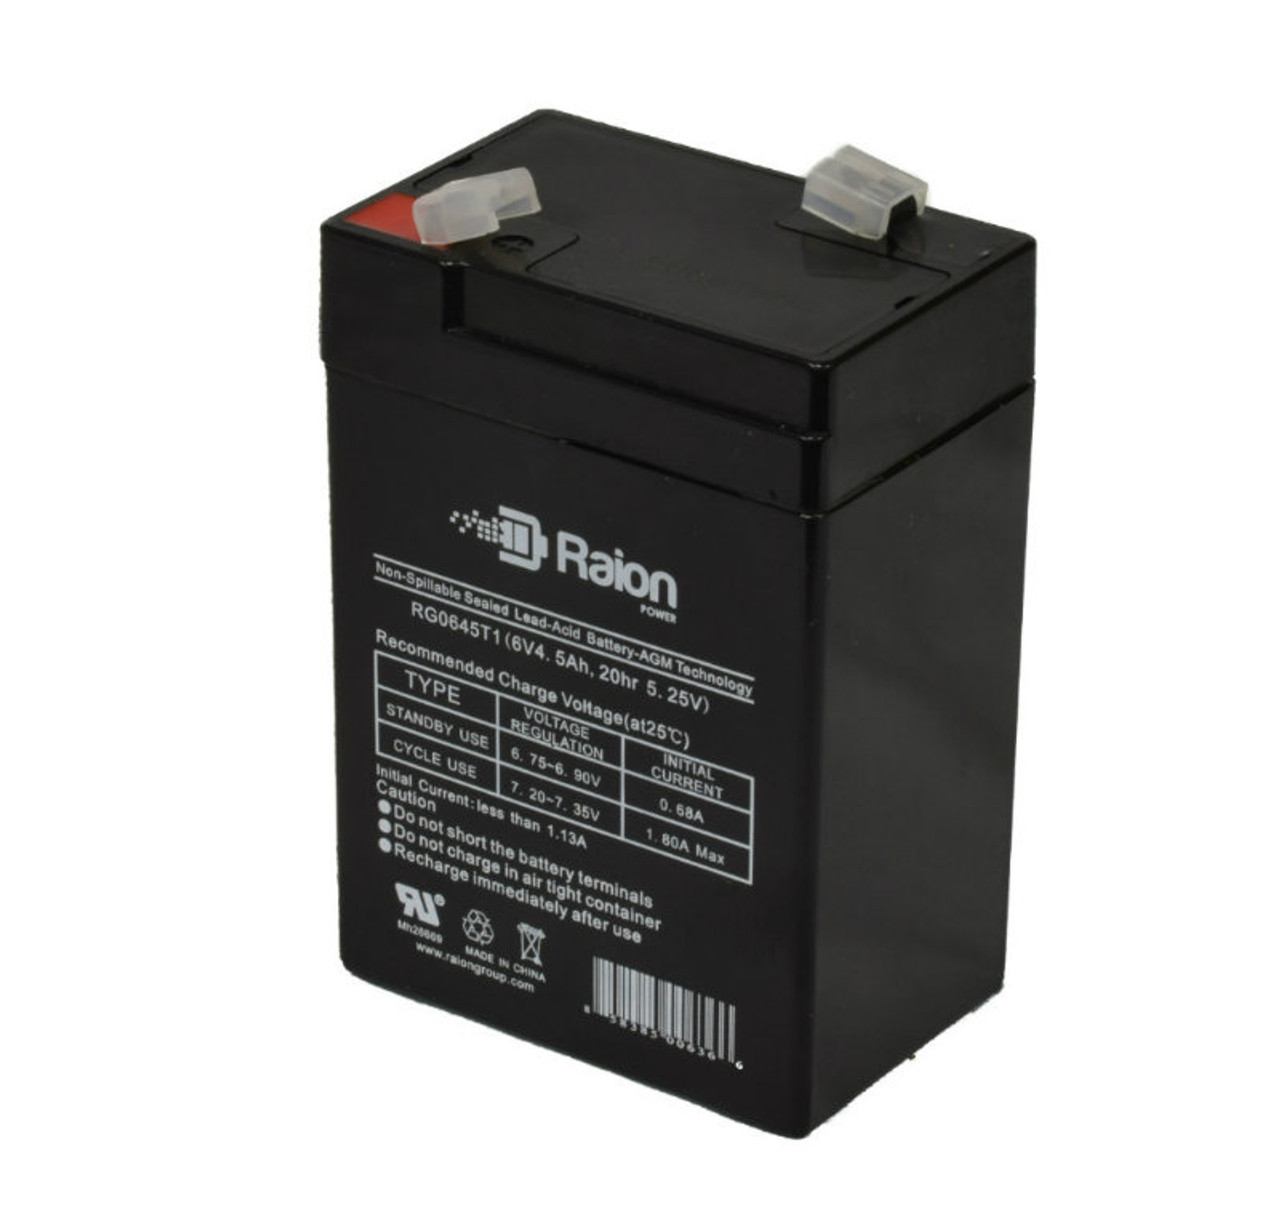 Raion Power RG0645T1 6V 4.5Ah Replacement Battery Cartridge for Dyna-Ray 4.5